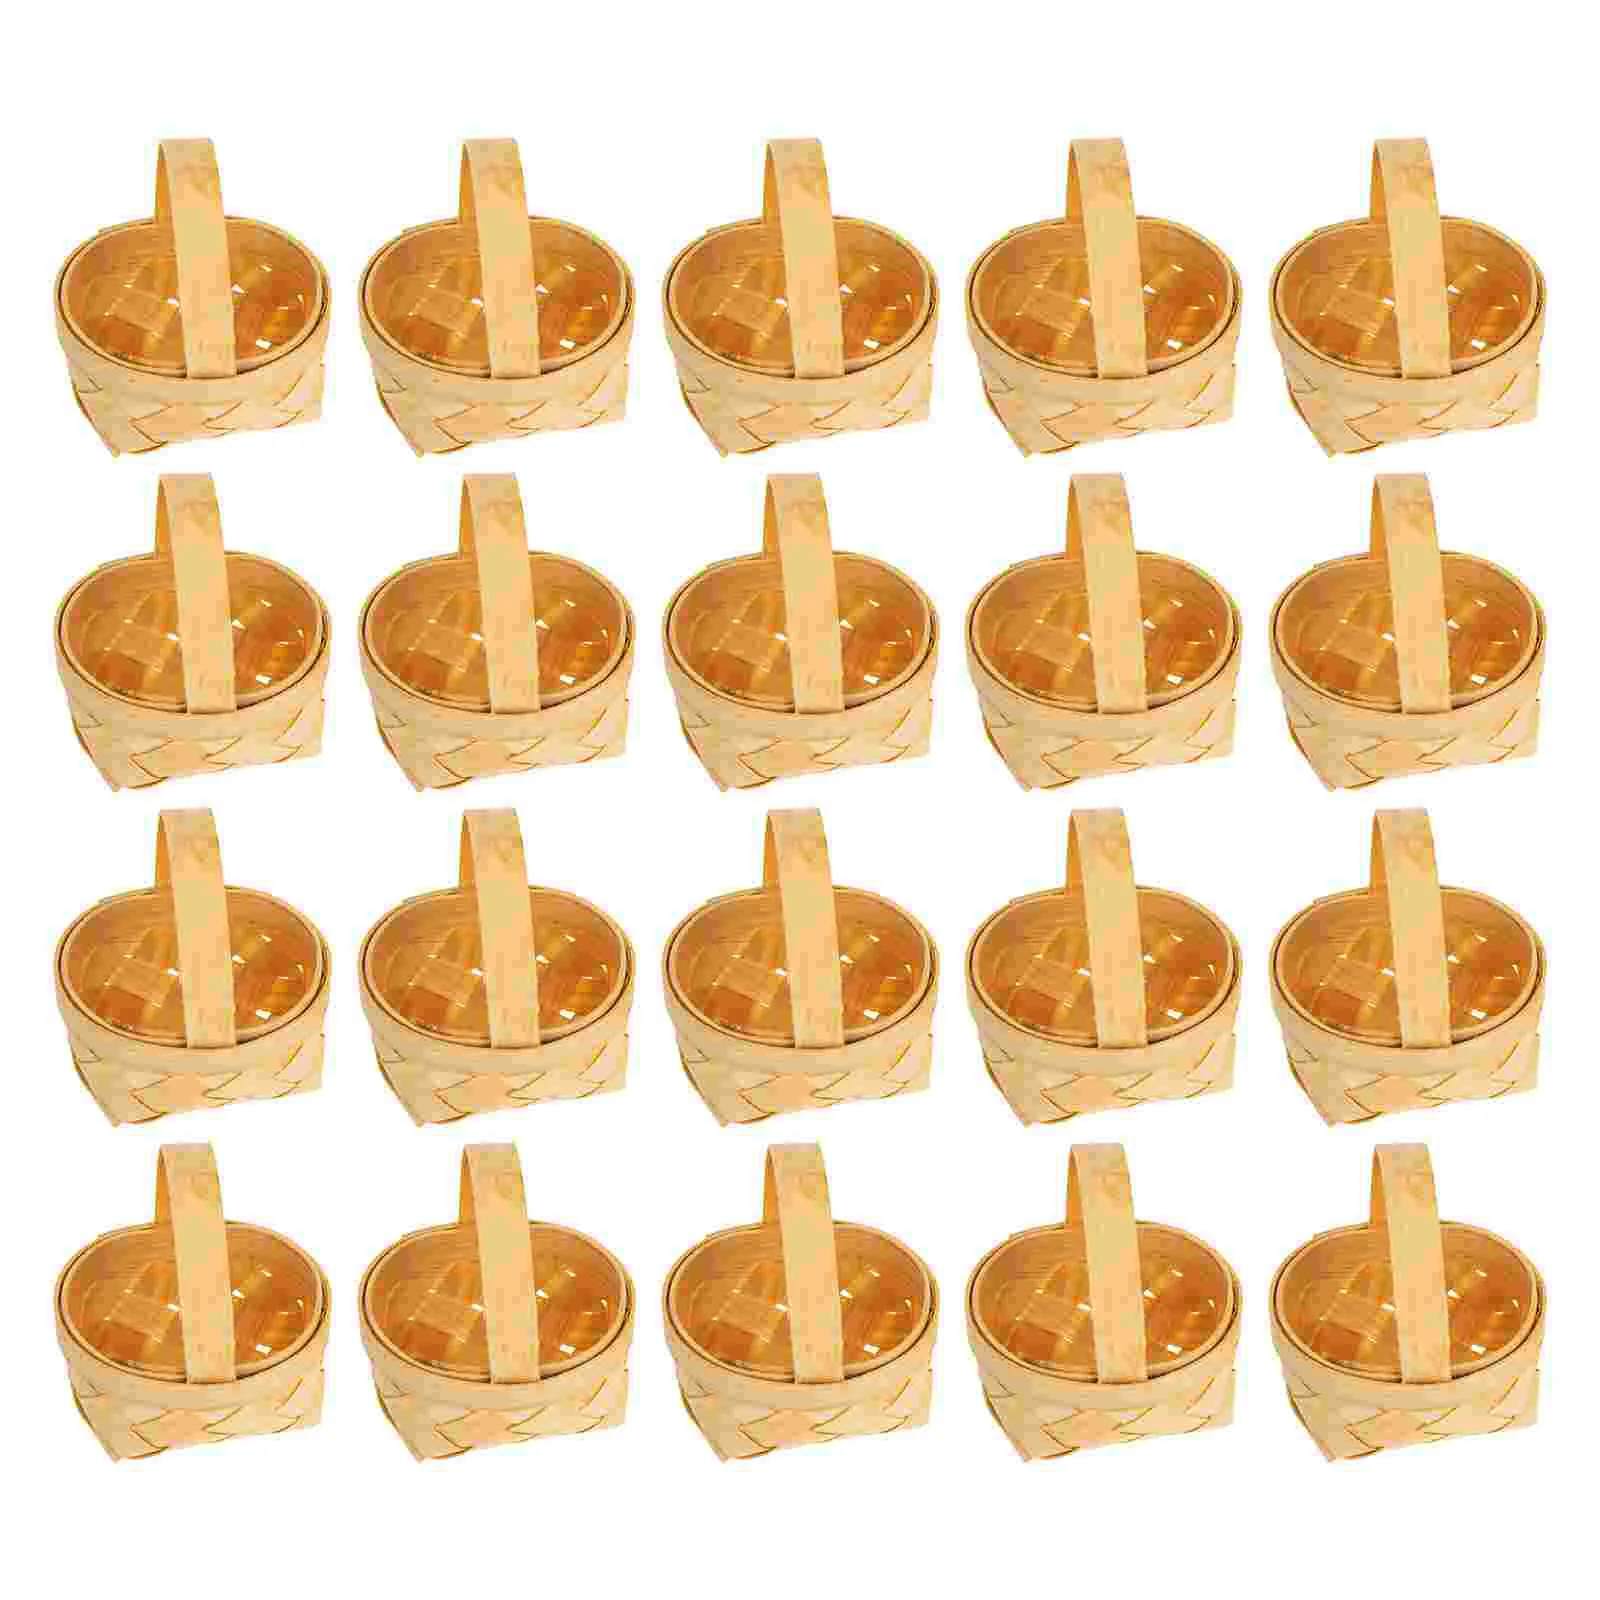 

20 Pcs Wood Chip Candy Hamper Handheld Baskets Weaving Mini Country Wedding Decorations Gifts Woven Big Playing House Wicker